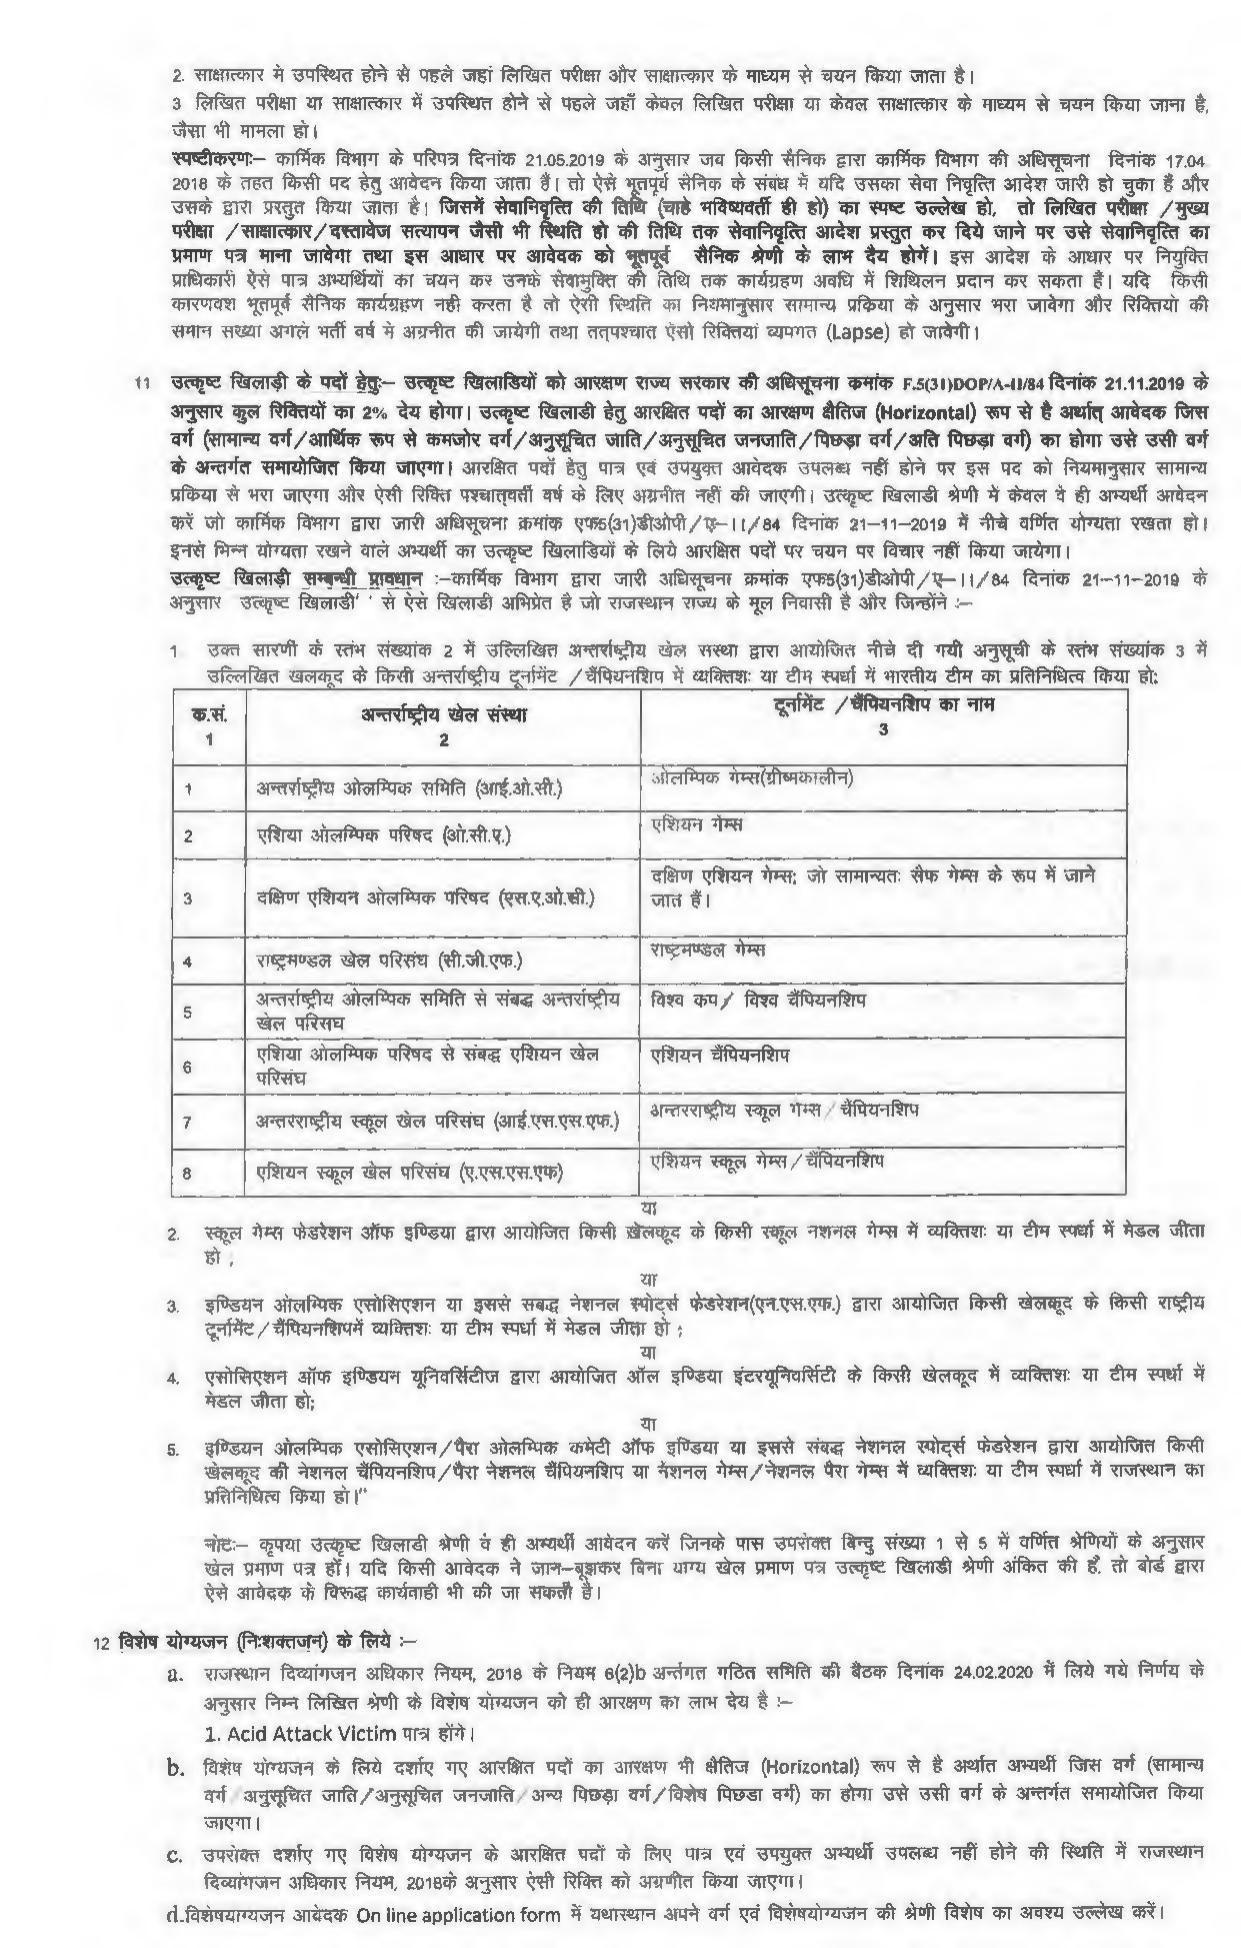 Download Notification – Advt. No. 04/2020 - Page 7